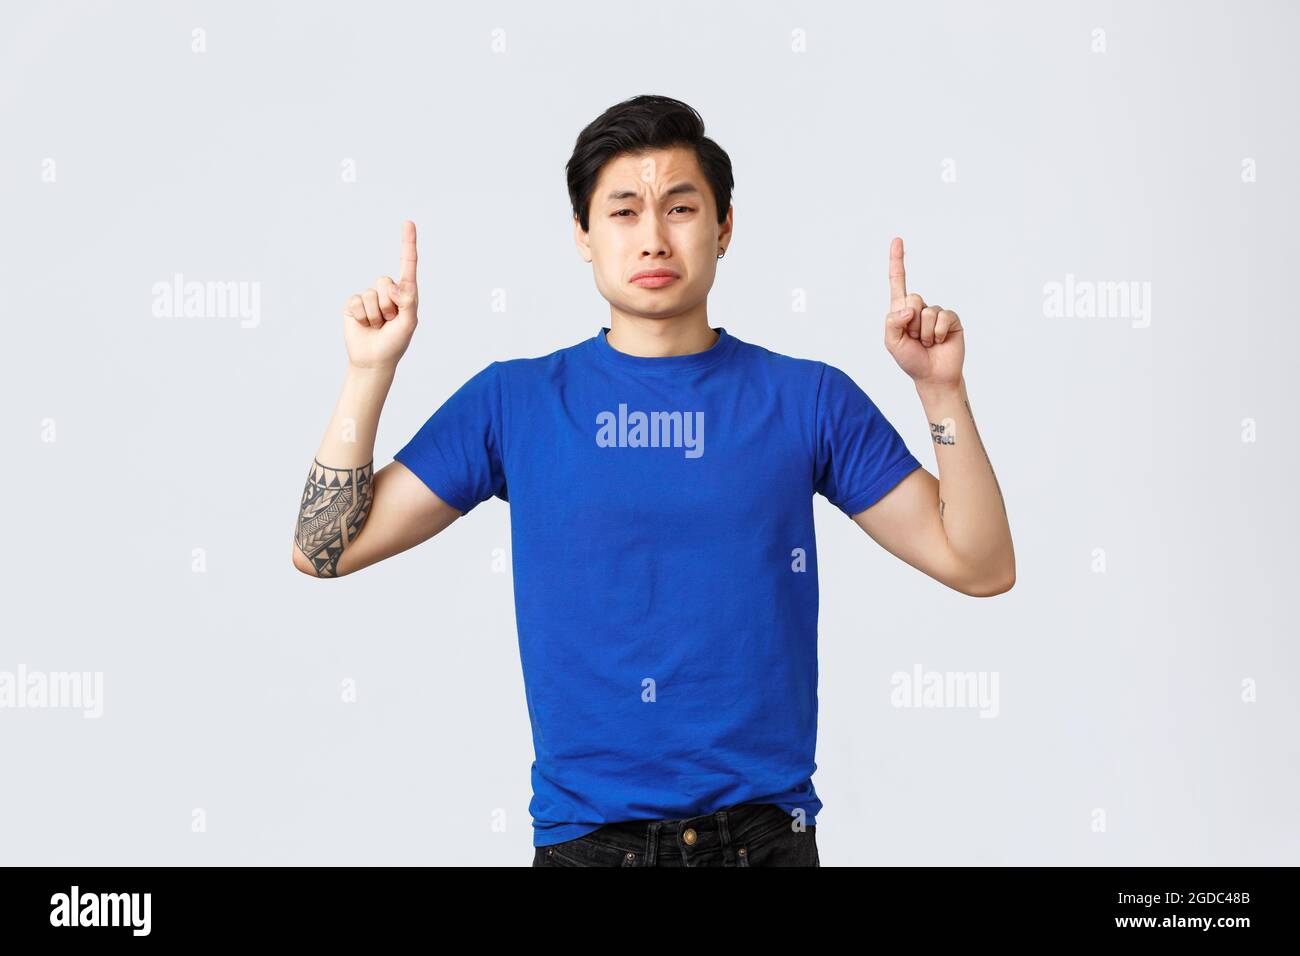 Different emotions, people lifestyle and advertising concept. Desperate and sad young grieving asian man in blue t-shirt, sobbing and whining Stock Photo